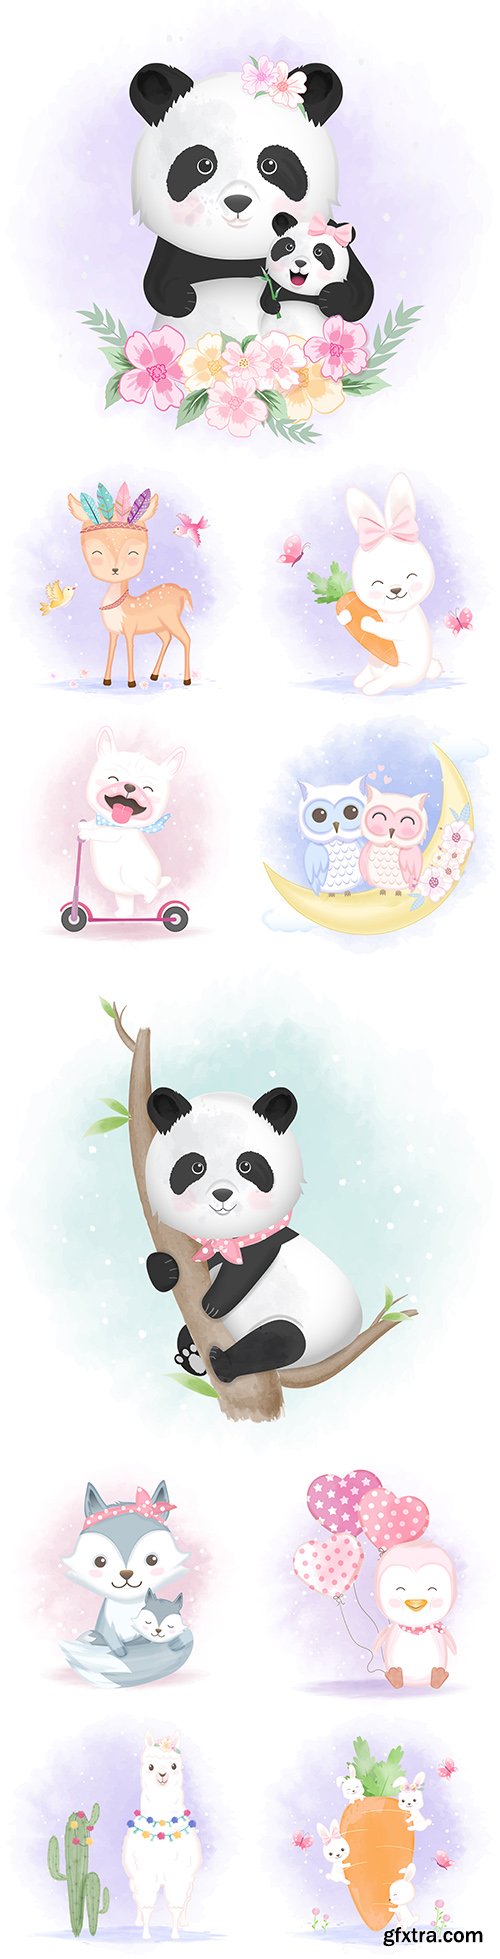 Funny animals cartoon watercolor with flowers illustrations 34
